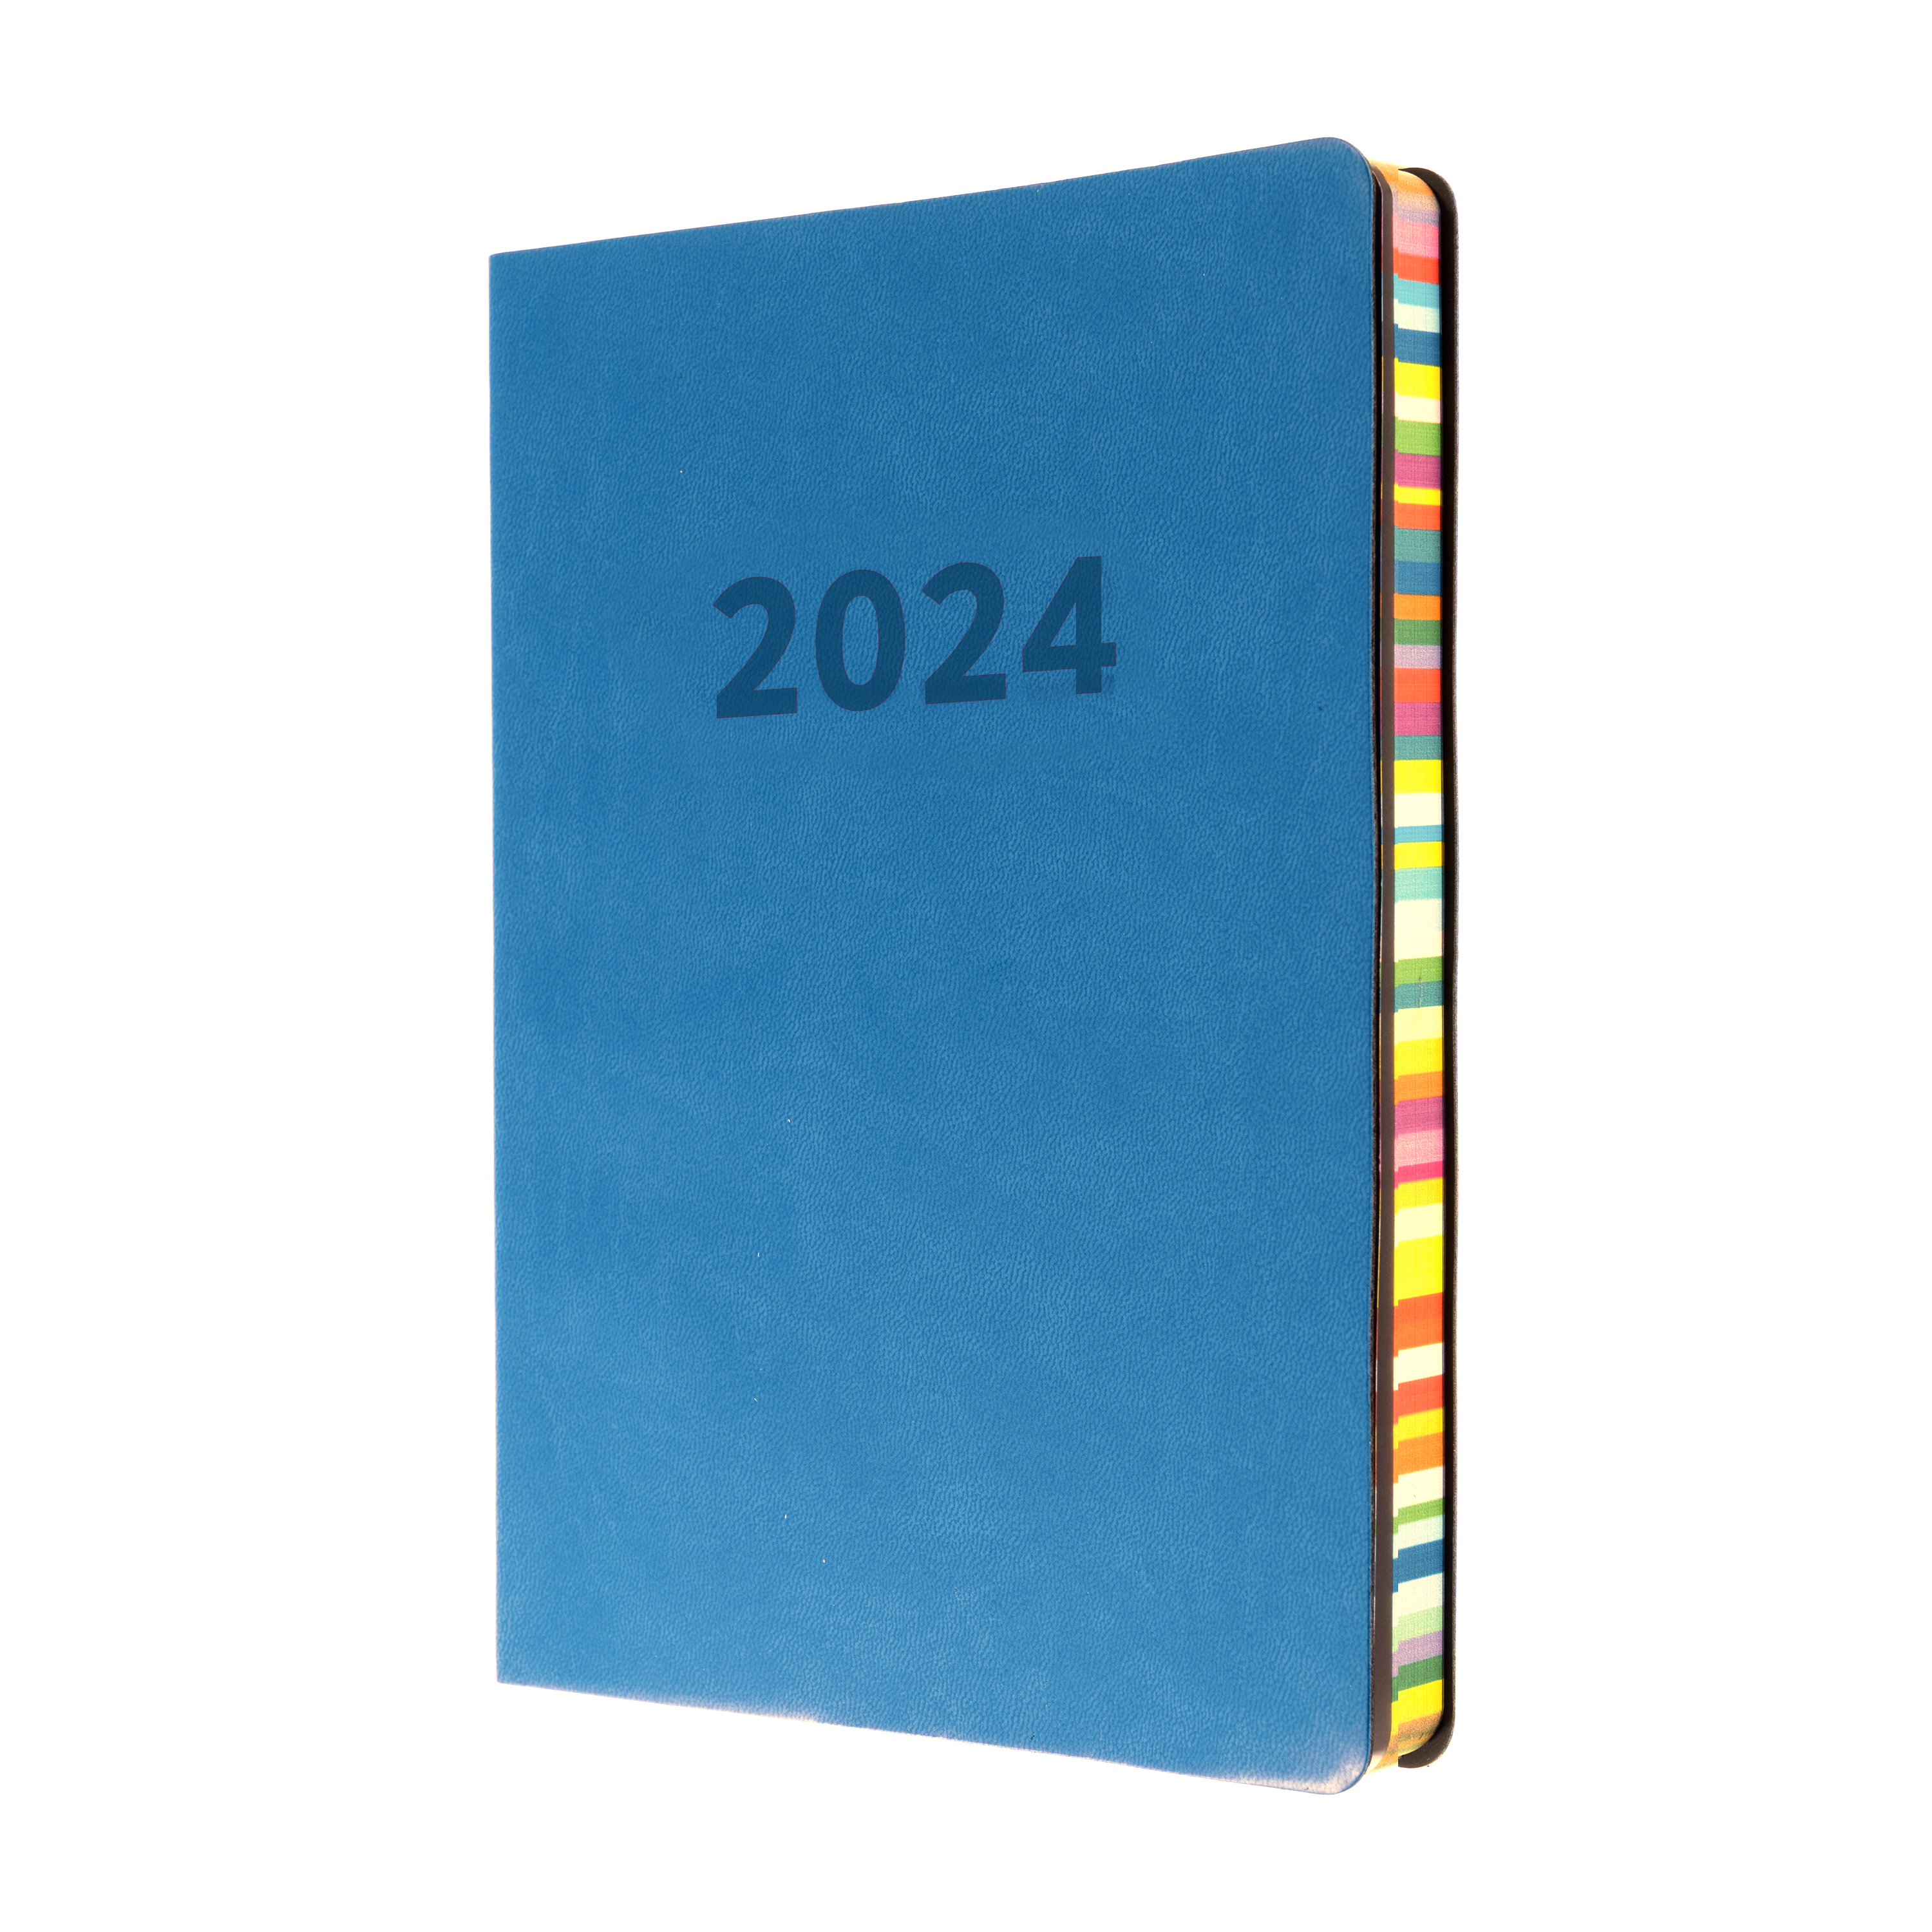 Collins Edge Rainbow - 2024 Weekly Lifestyle Planner - A5 Week-to-View Diary (ED153-24)